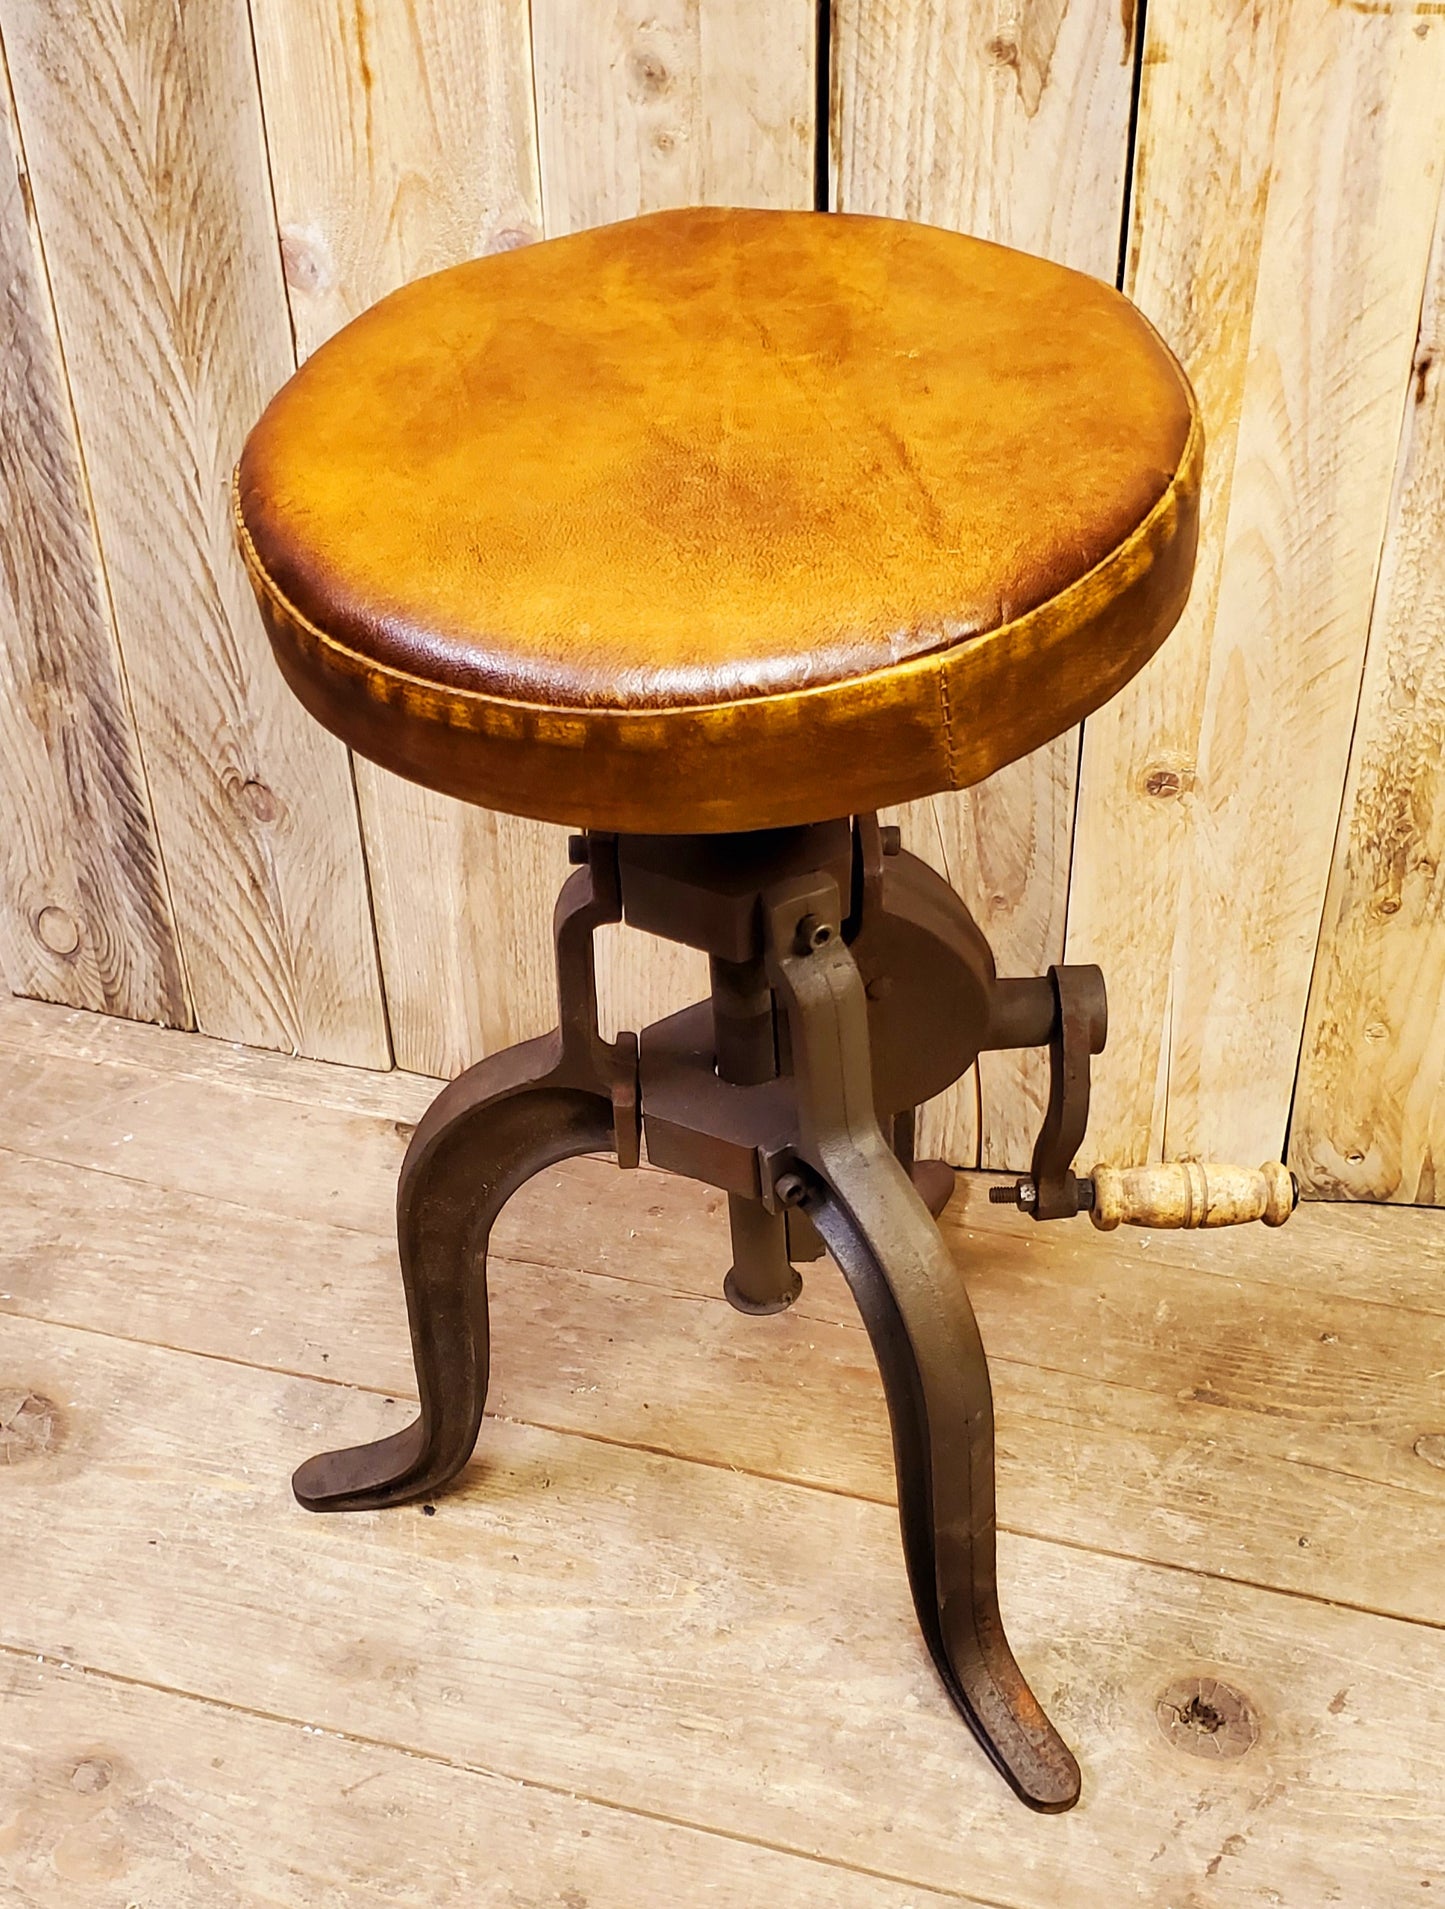 The Abercrombie -  Crank Handle Stool only (No Top)